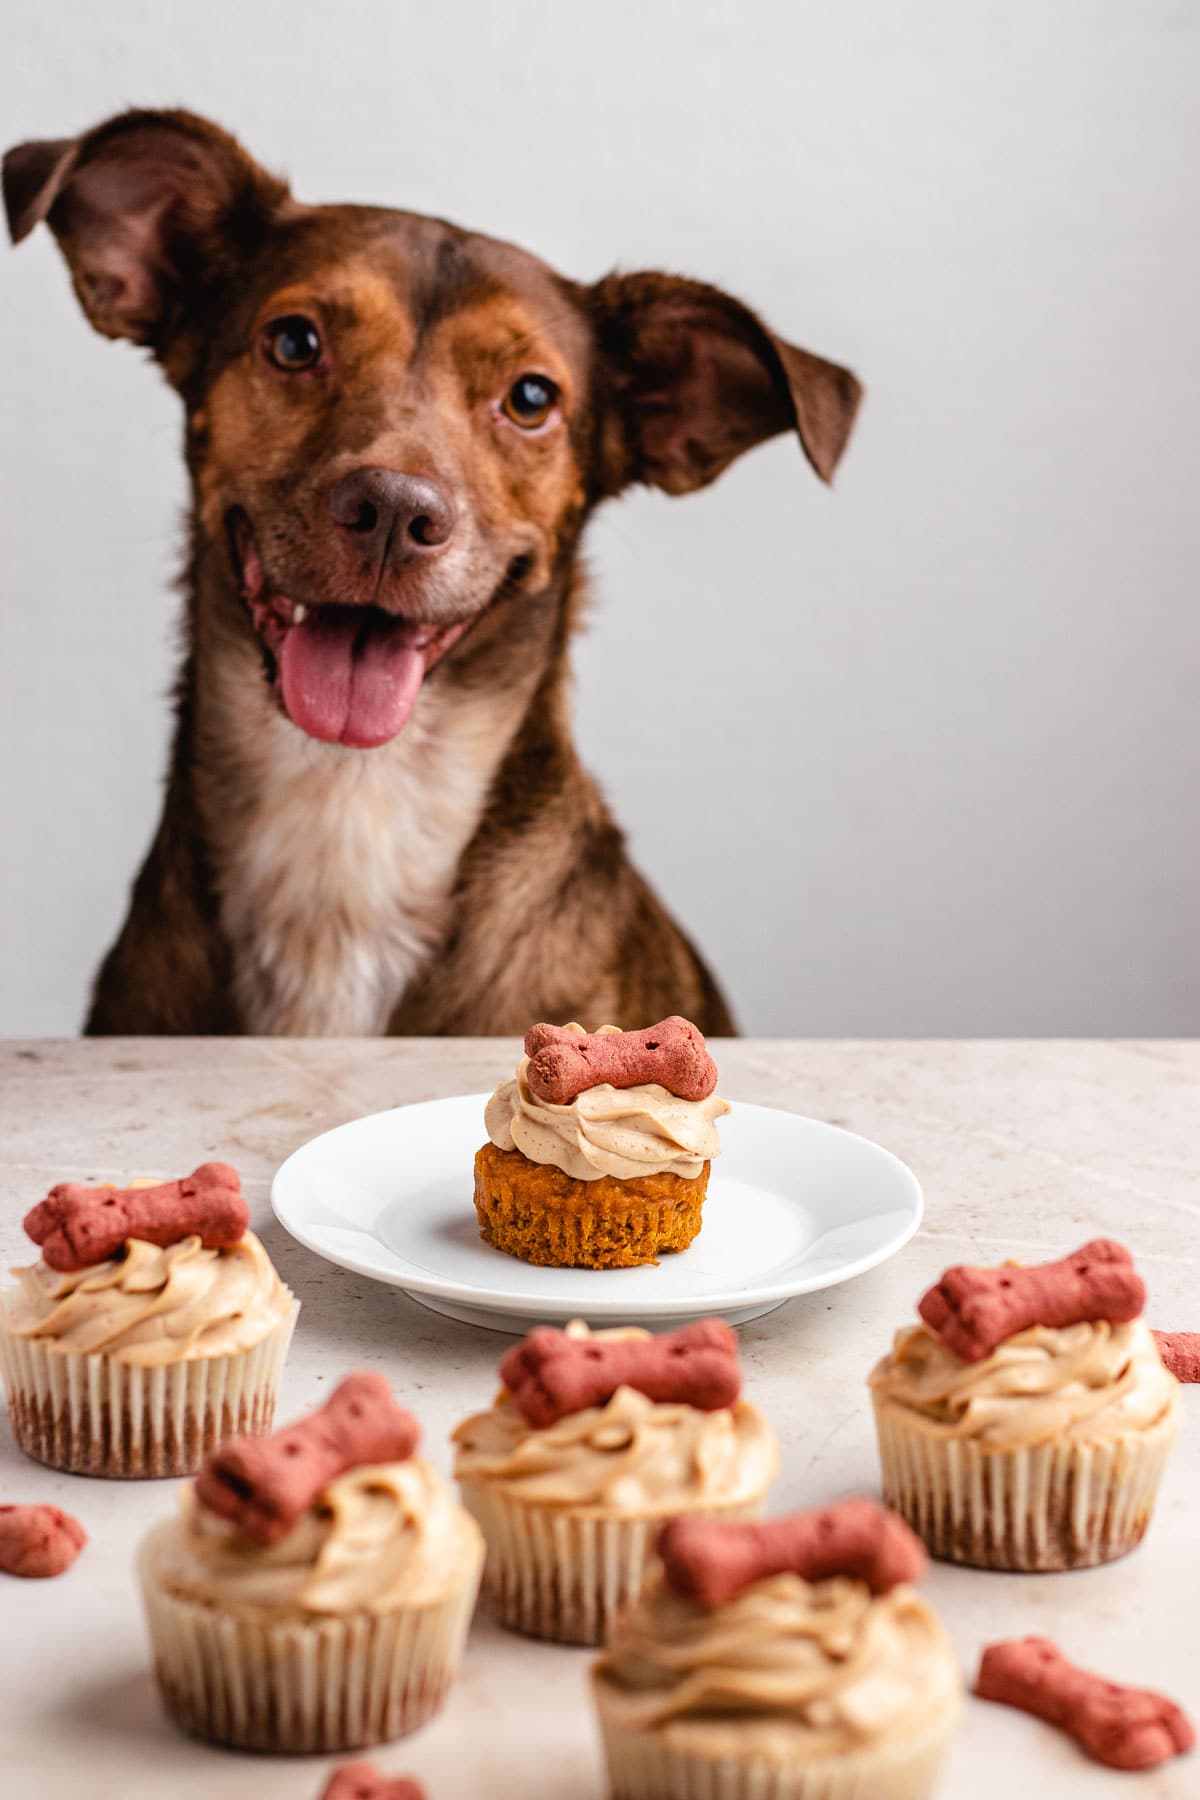 Dog Cupcakes Pupcakes brown dog with cupcake on plate and more cupcakes spread out in front of plate